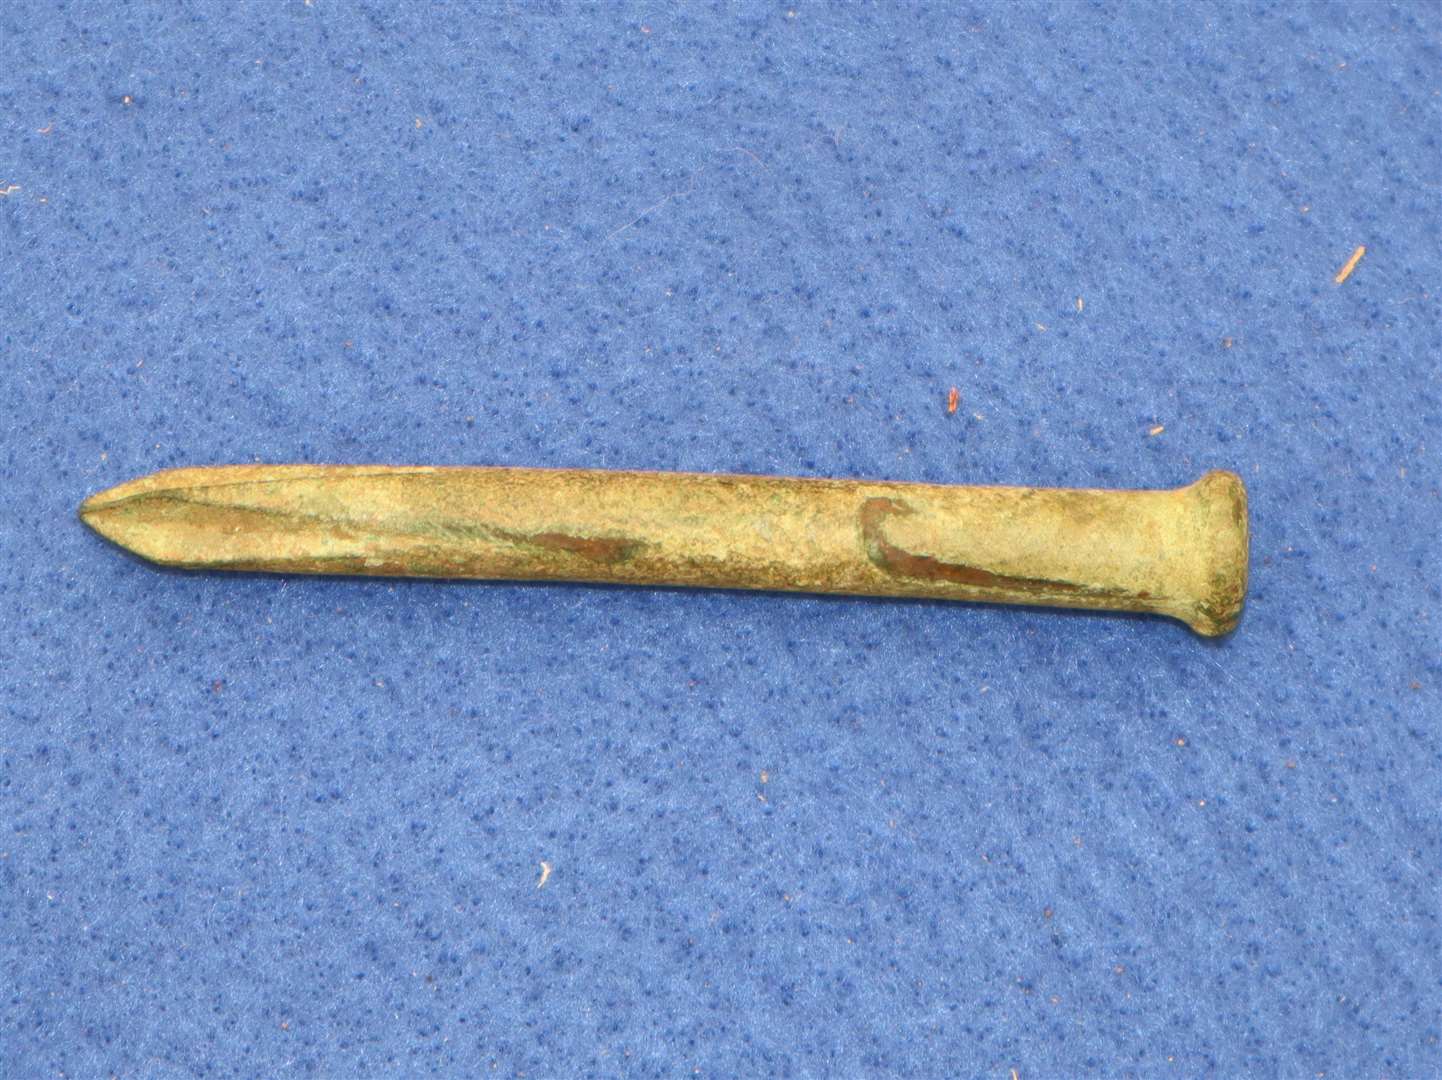 A bronze catapult bolt found at Minster during the Medway History Finders' rally. The grooves made it spin through the air creating a buzzing sign to frighten the enemy